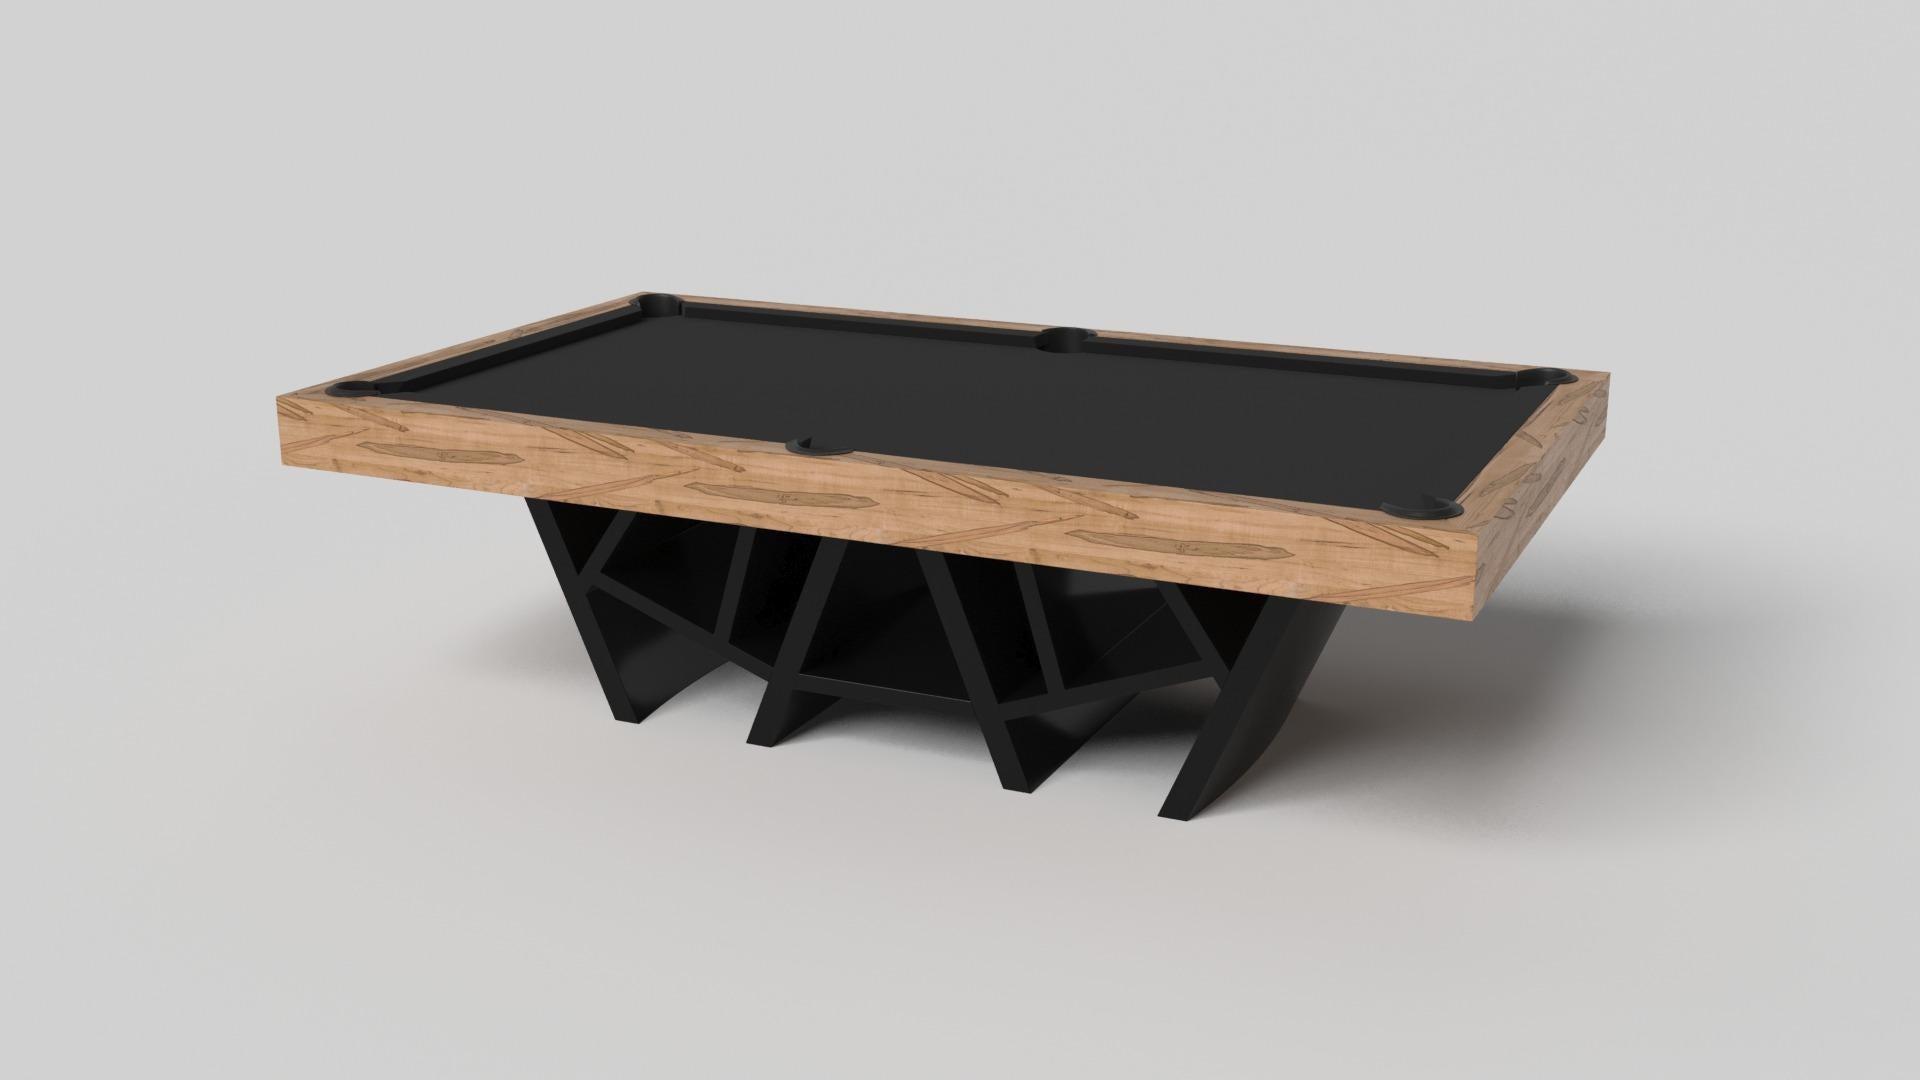 A contemporary composition of clean lines and sleek edges, the Trinity pool table in black chrome with red accent is an elegant expression of modern design. Handcrafted and detailed with a regulation top for professional game play, this table offers